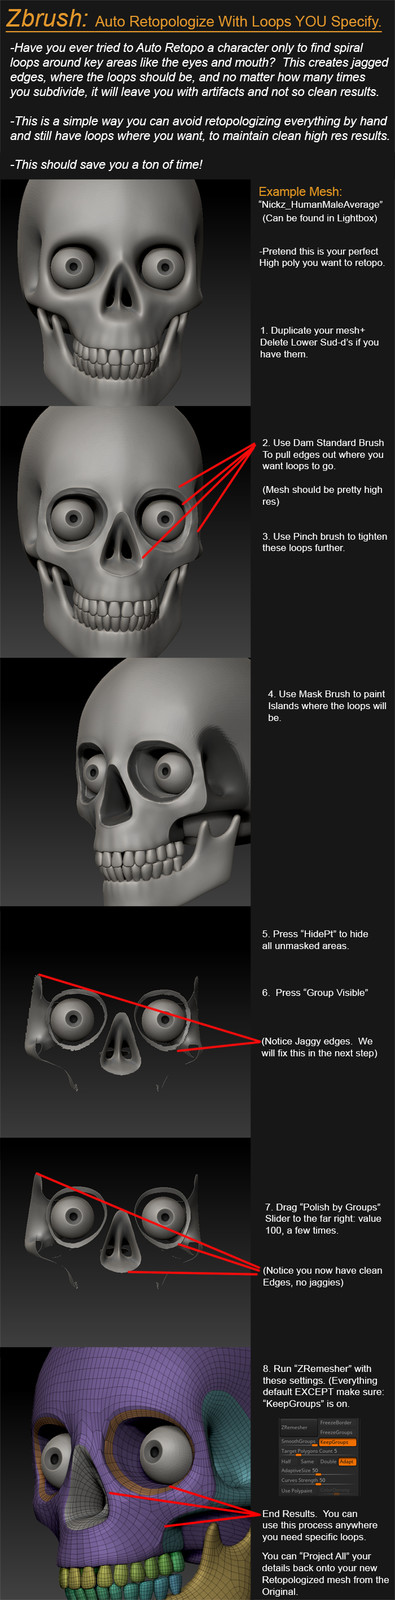 Auto Retopologize Tutorial with Specified Loops.